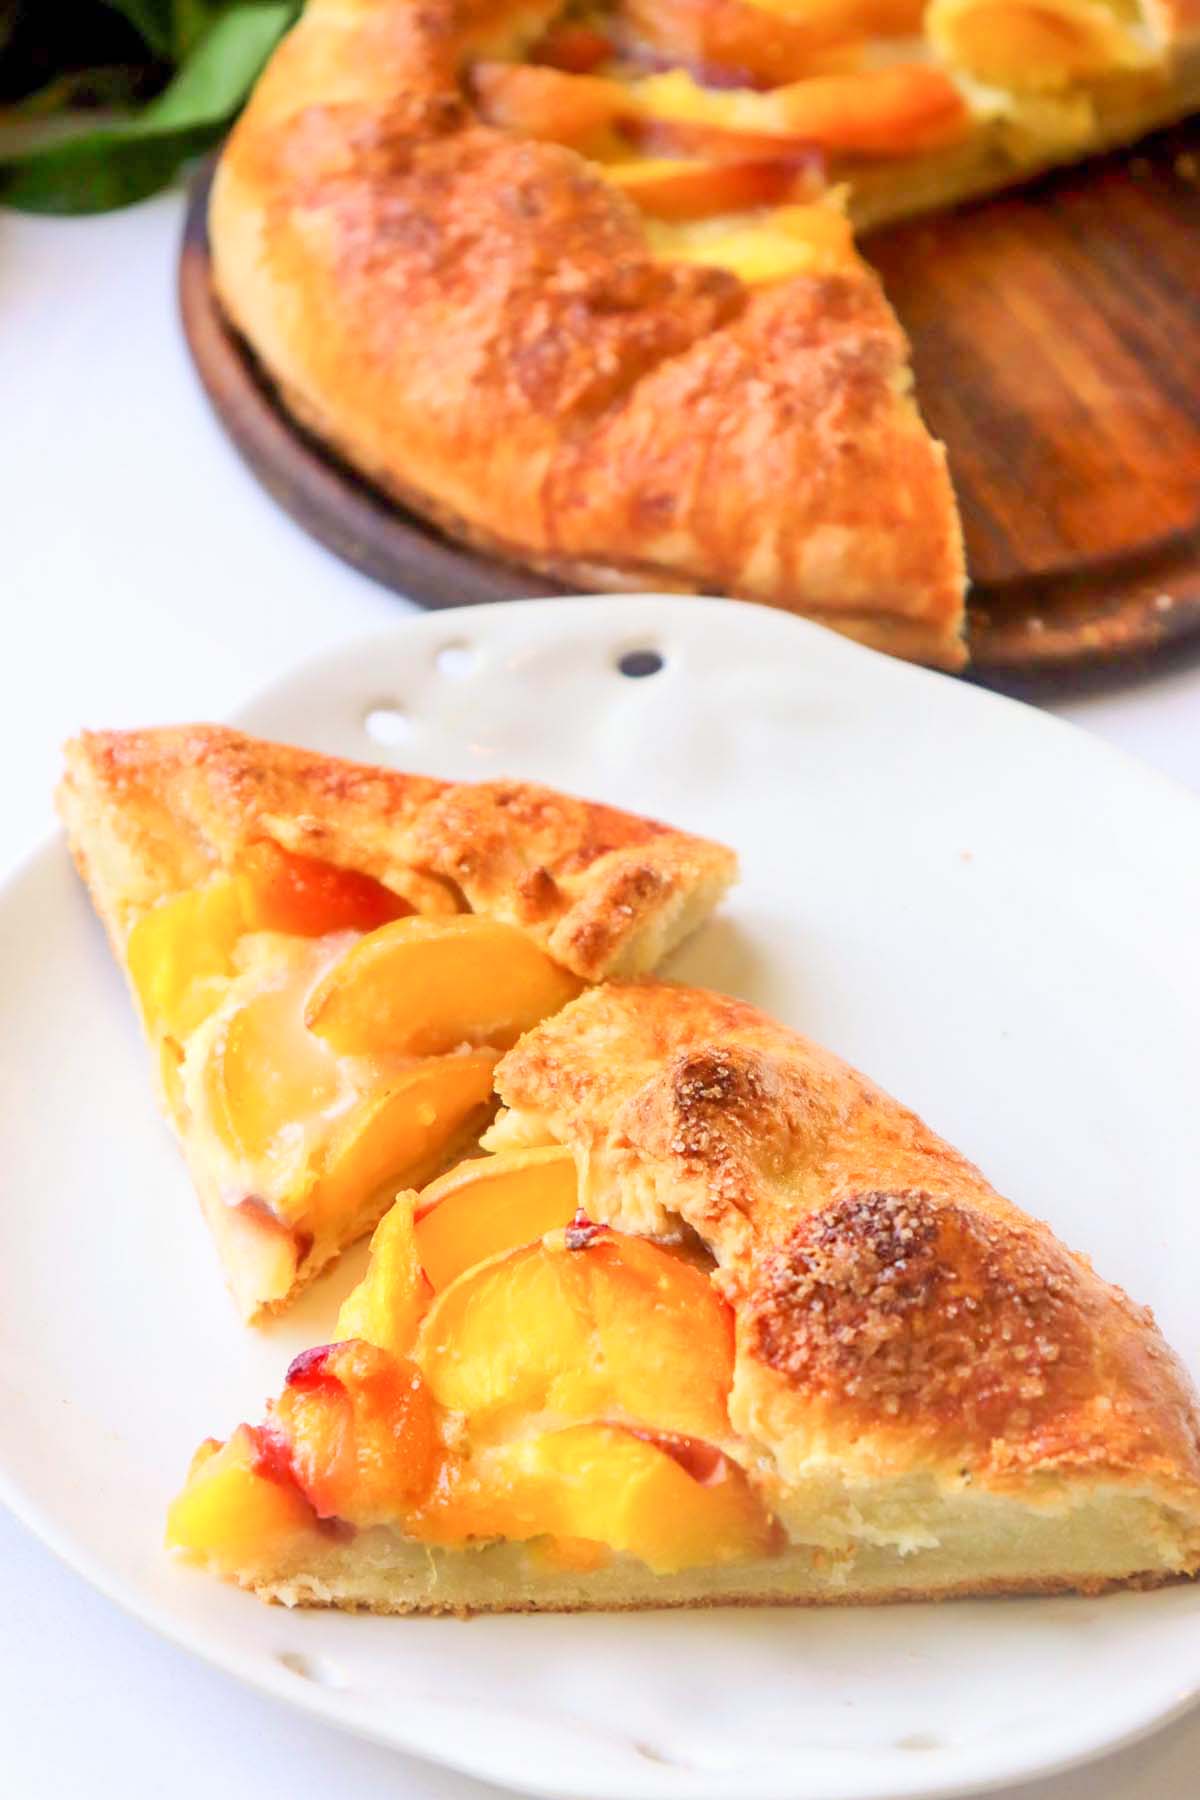 two slices of peach galette on a plate.